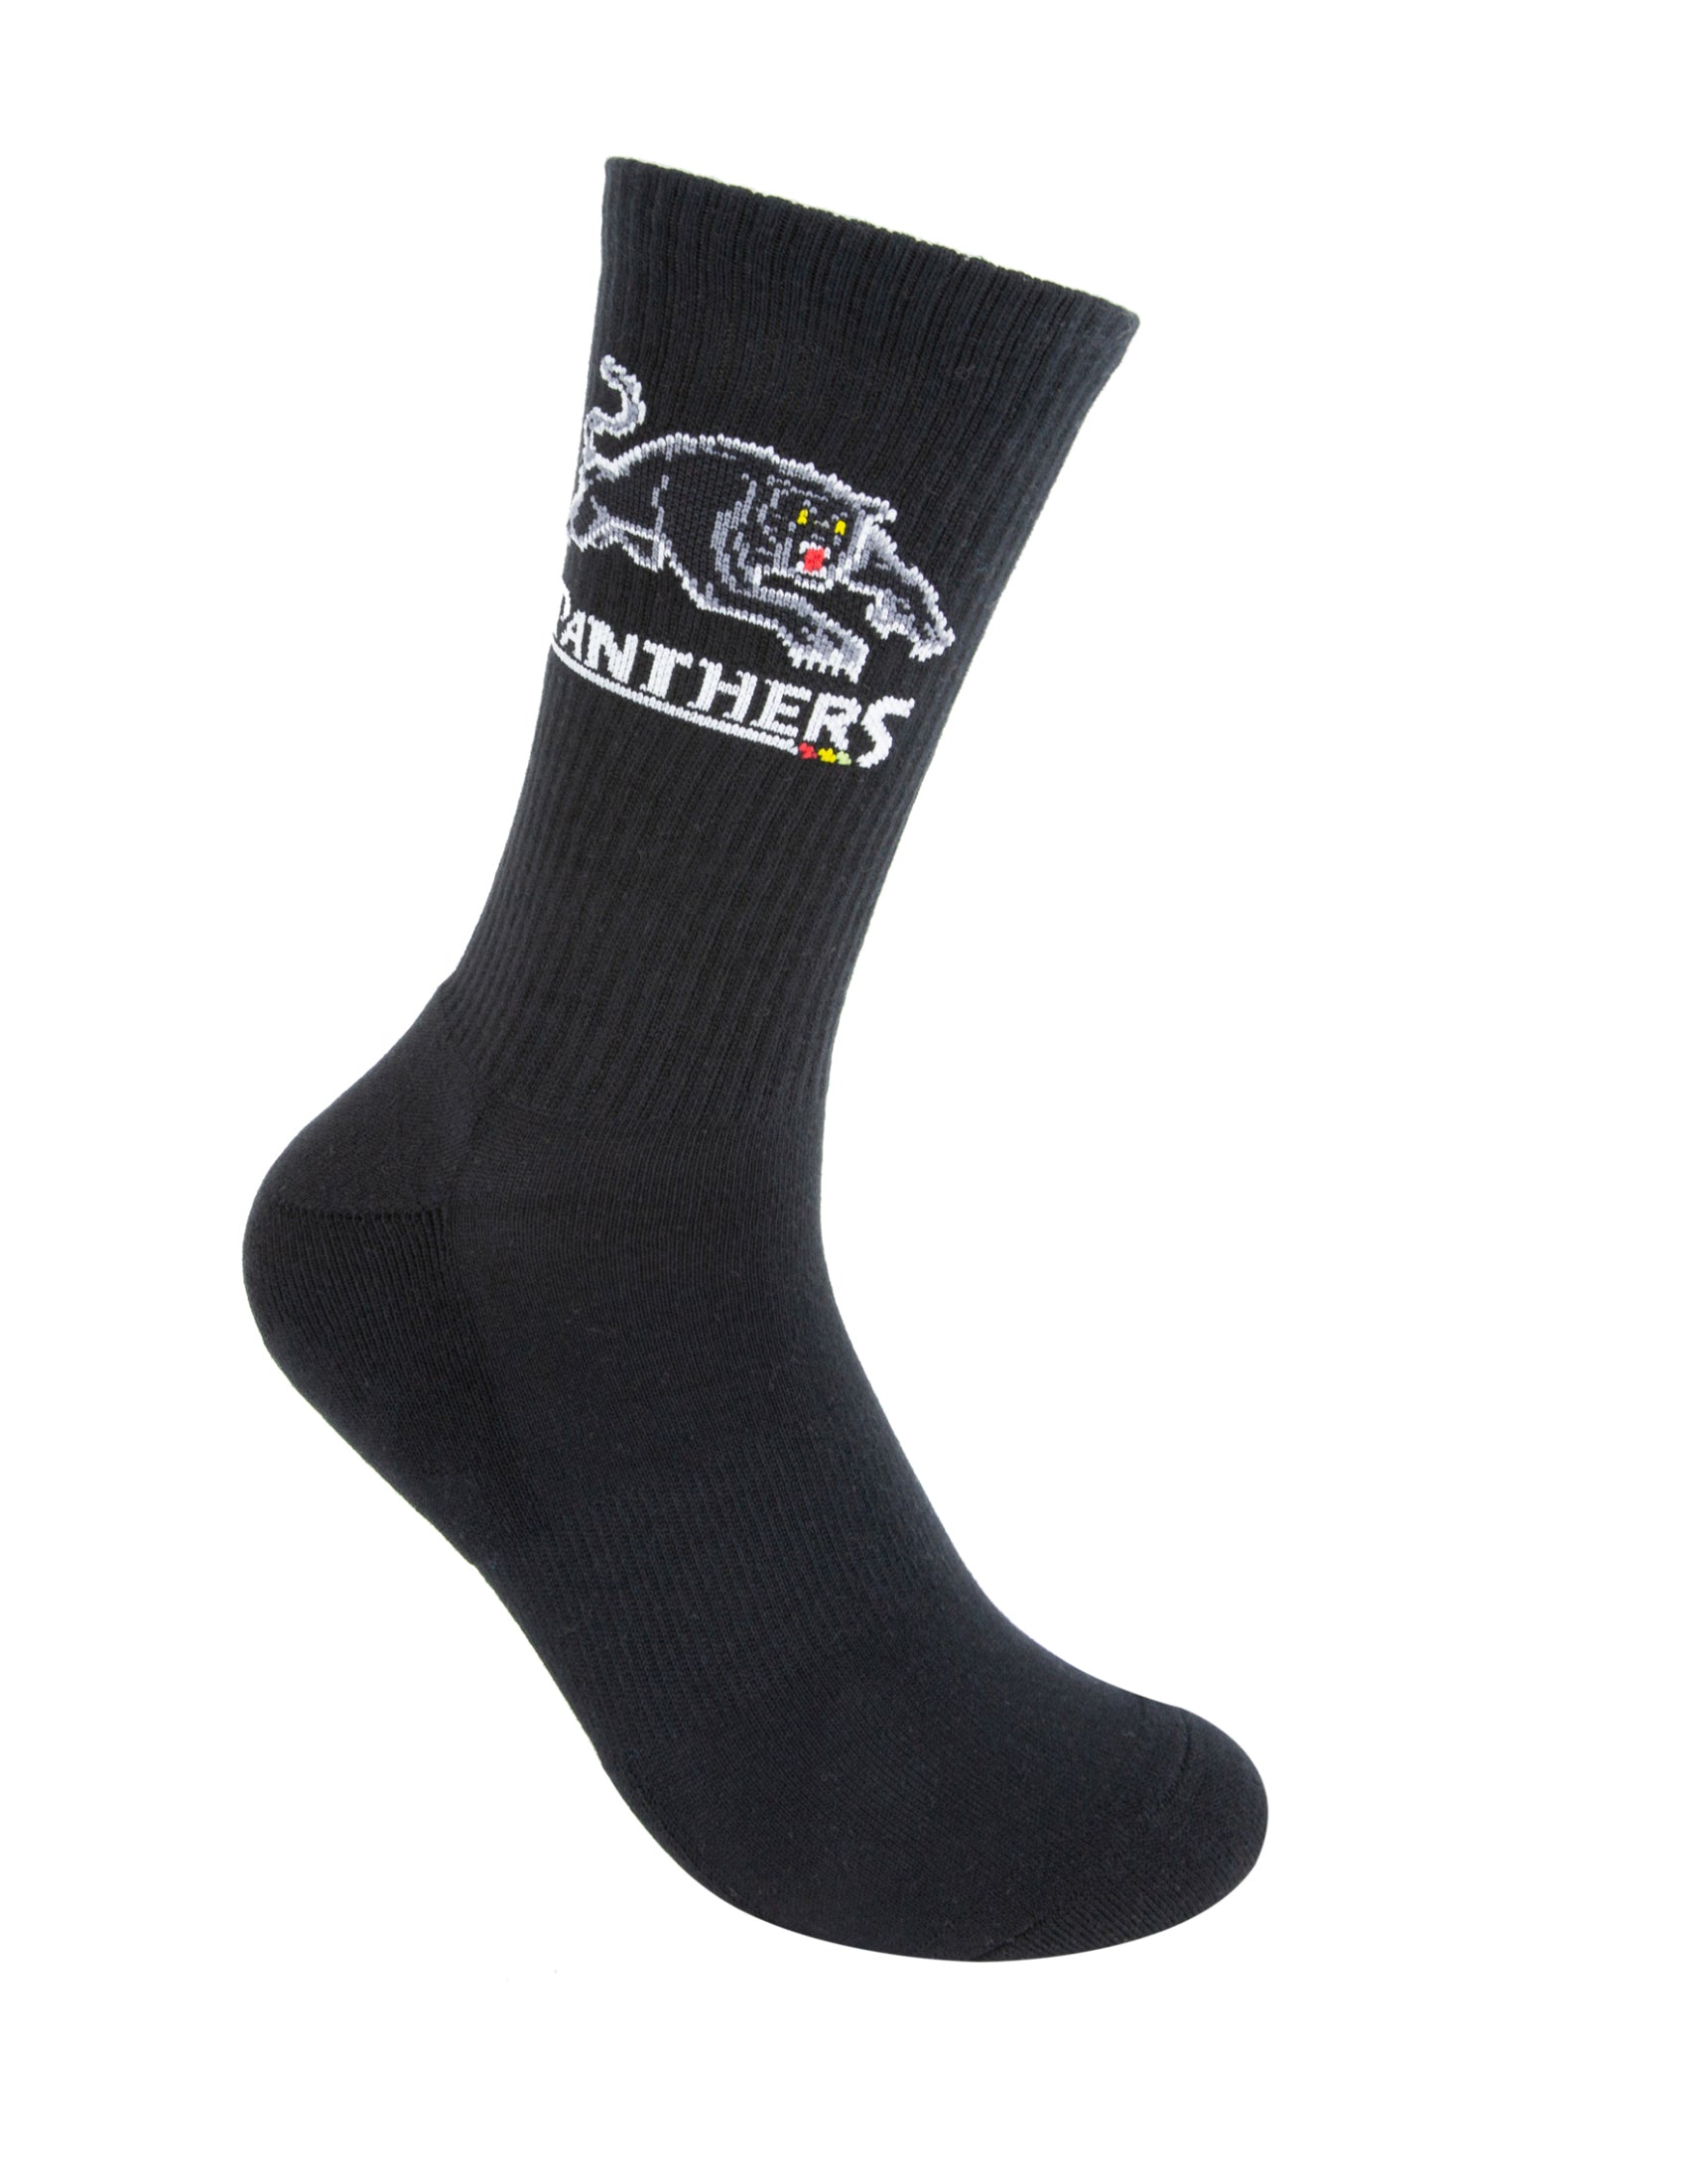 Penrith Panthers Icons Sneaker Socks 2 Pack